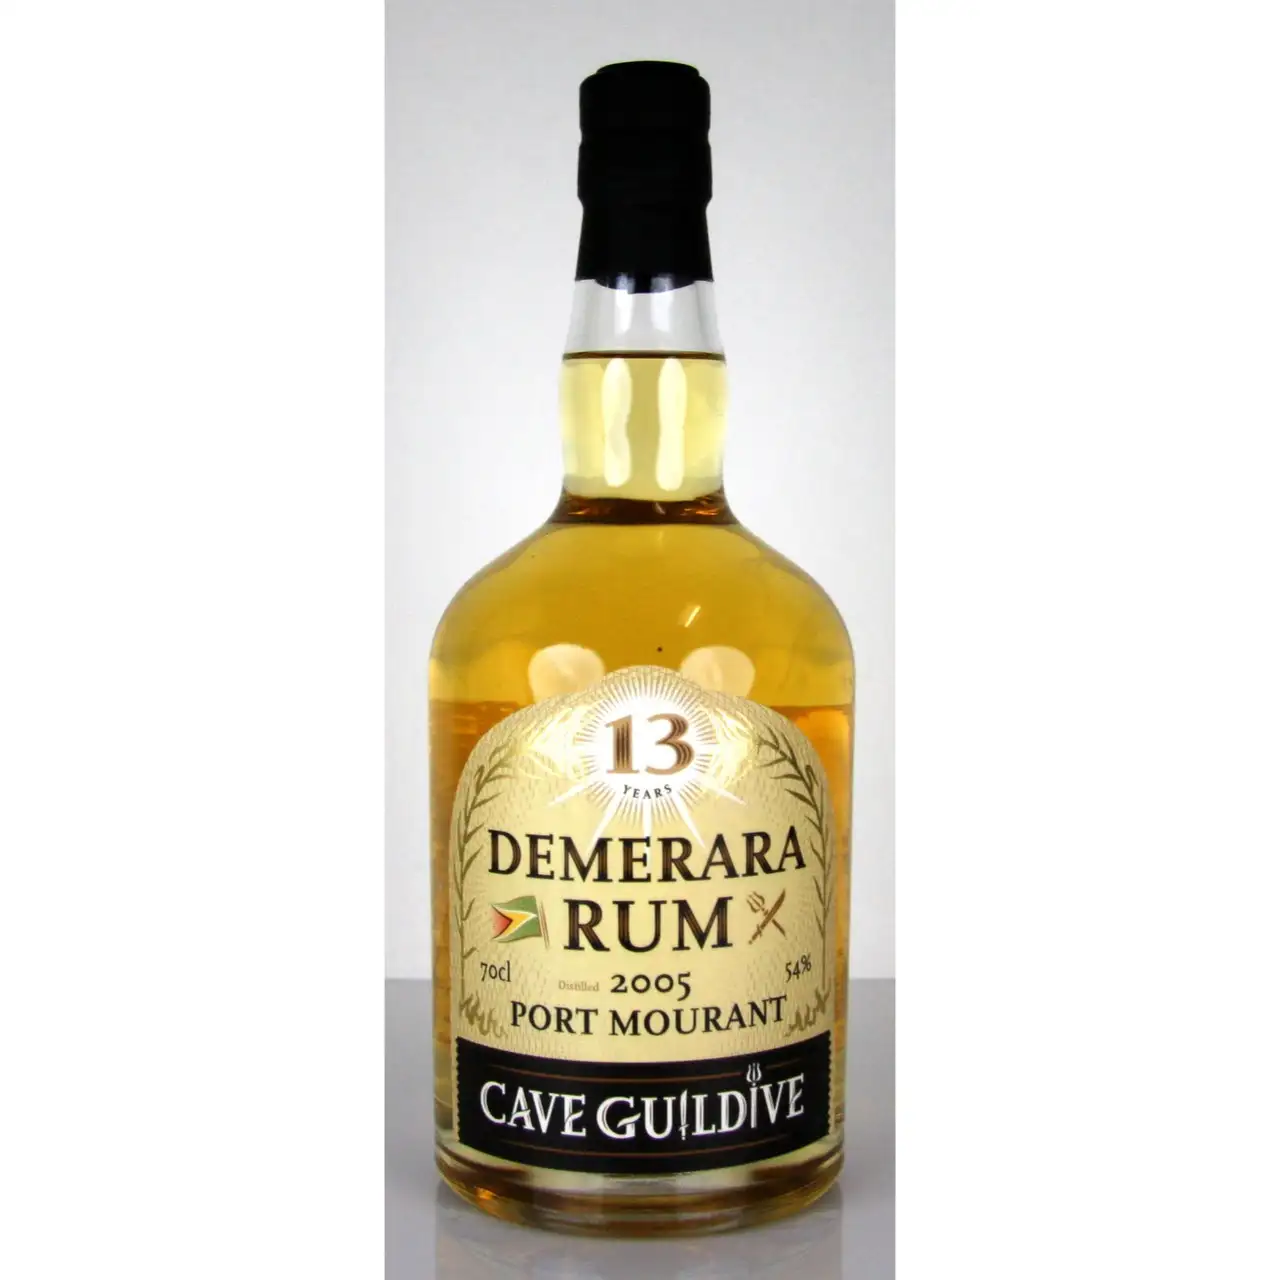 Image of the front of the bottle of the rum Demerara Rum PM